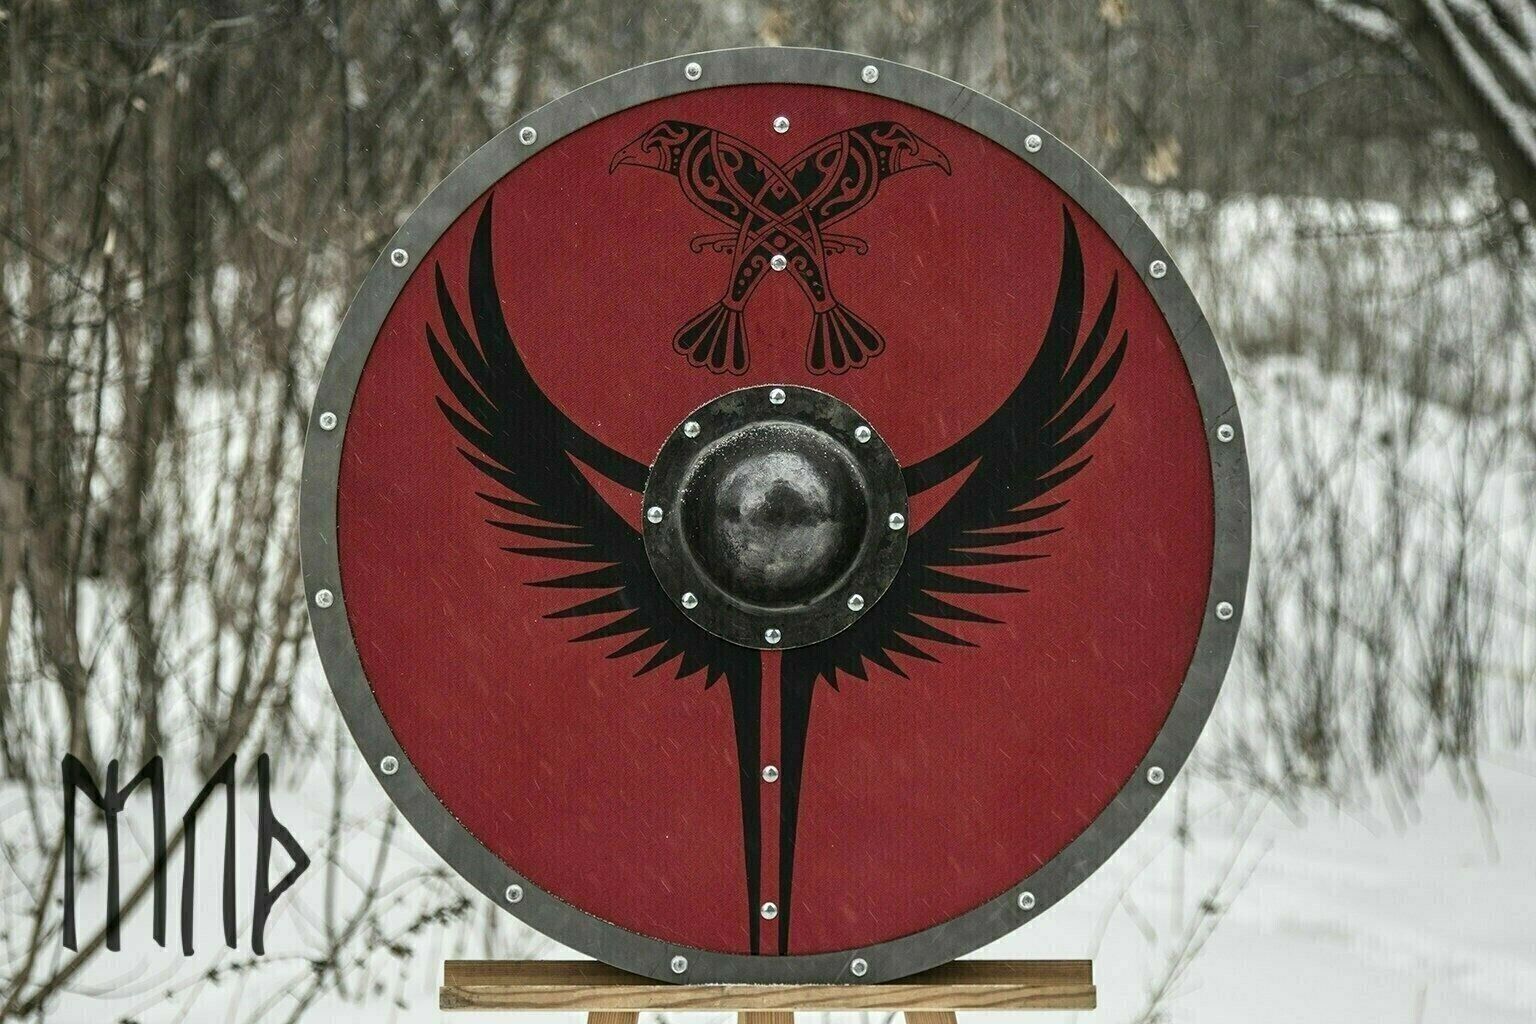 X-MAS GIFT Wood & Metal Medieval Knight Shield Handcrafted Viking Shield 24 inch